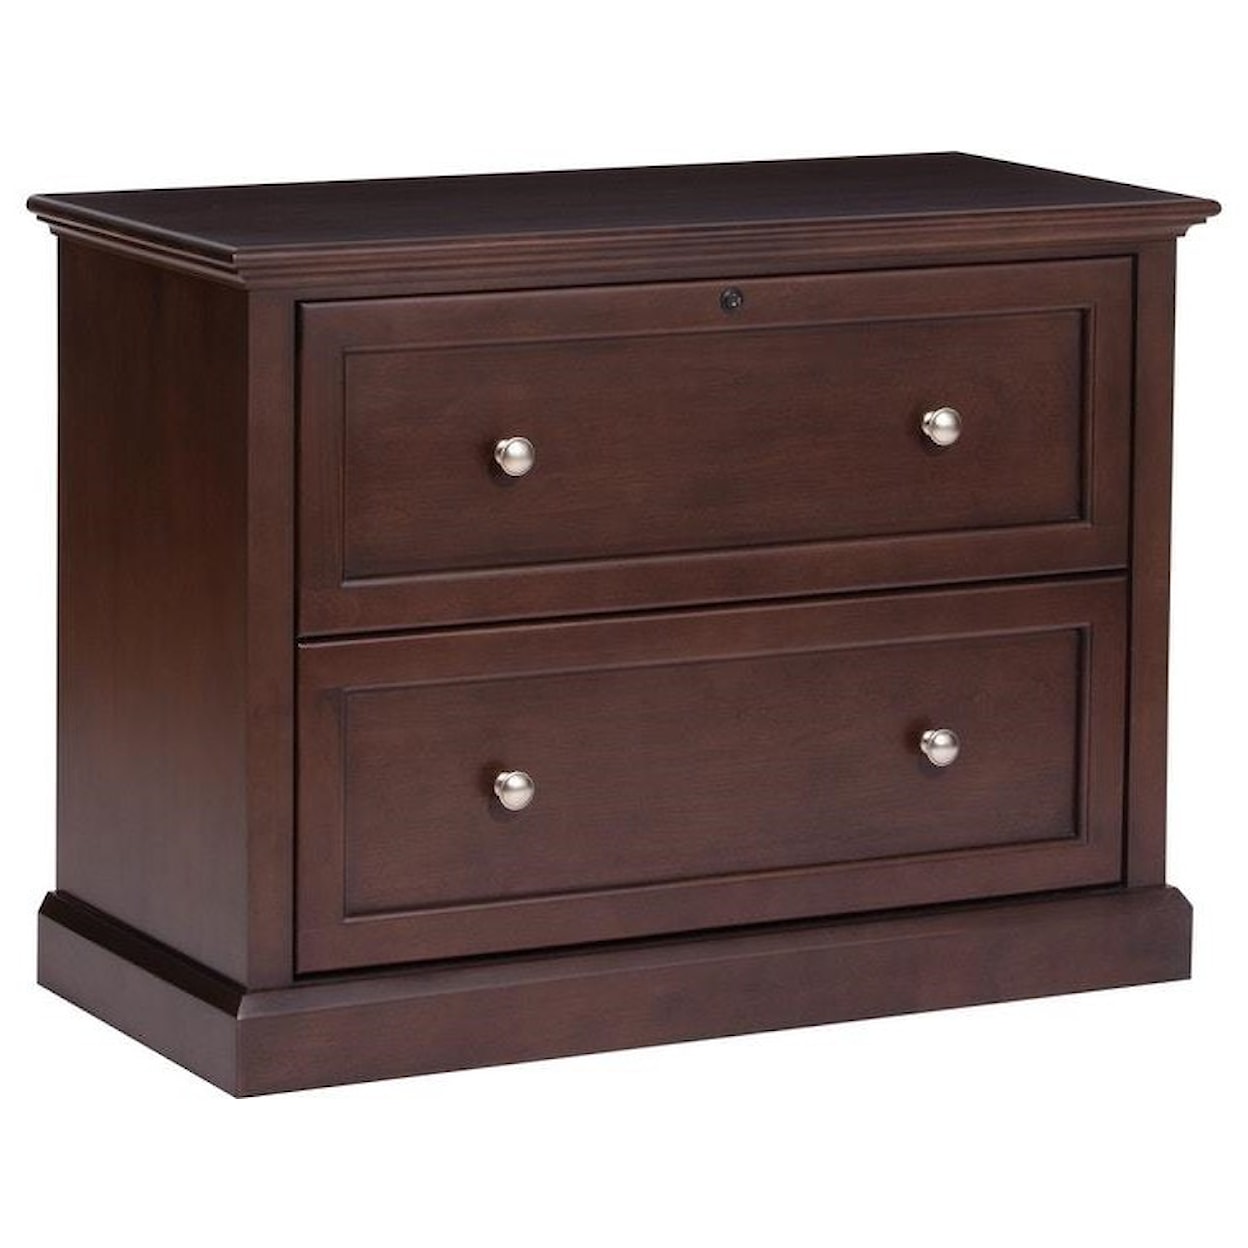 Whittier Wood McKenzie Cafe  Lateral File Cabinet